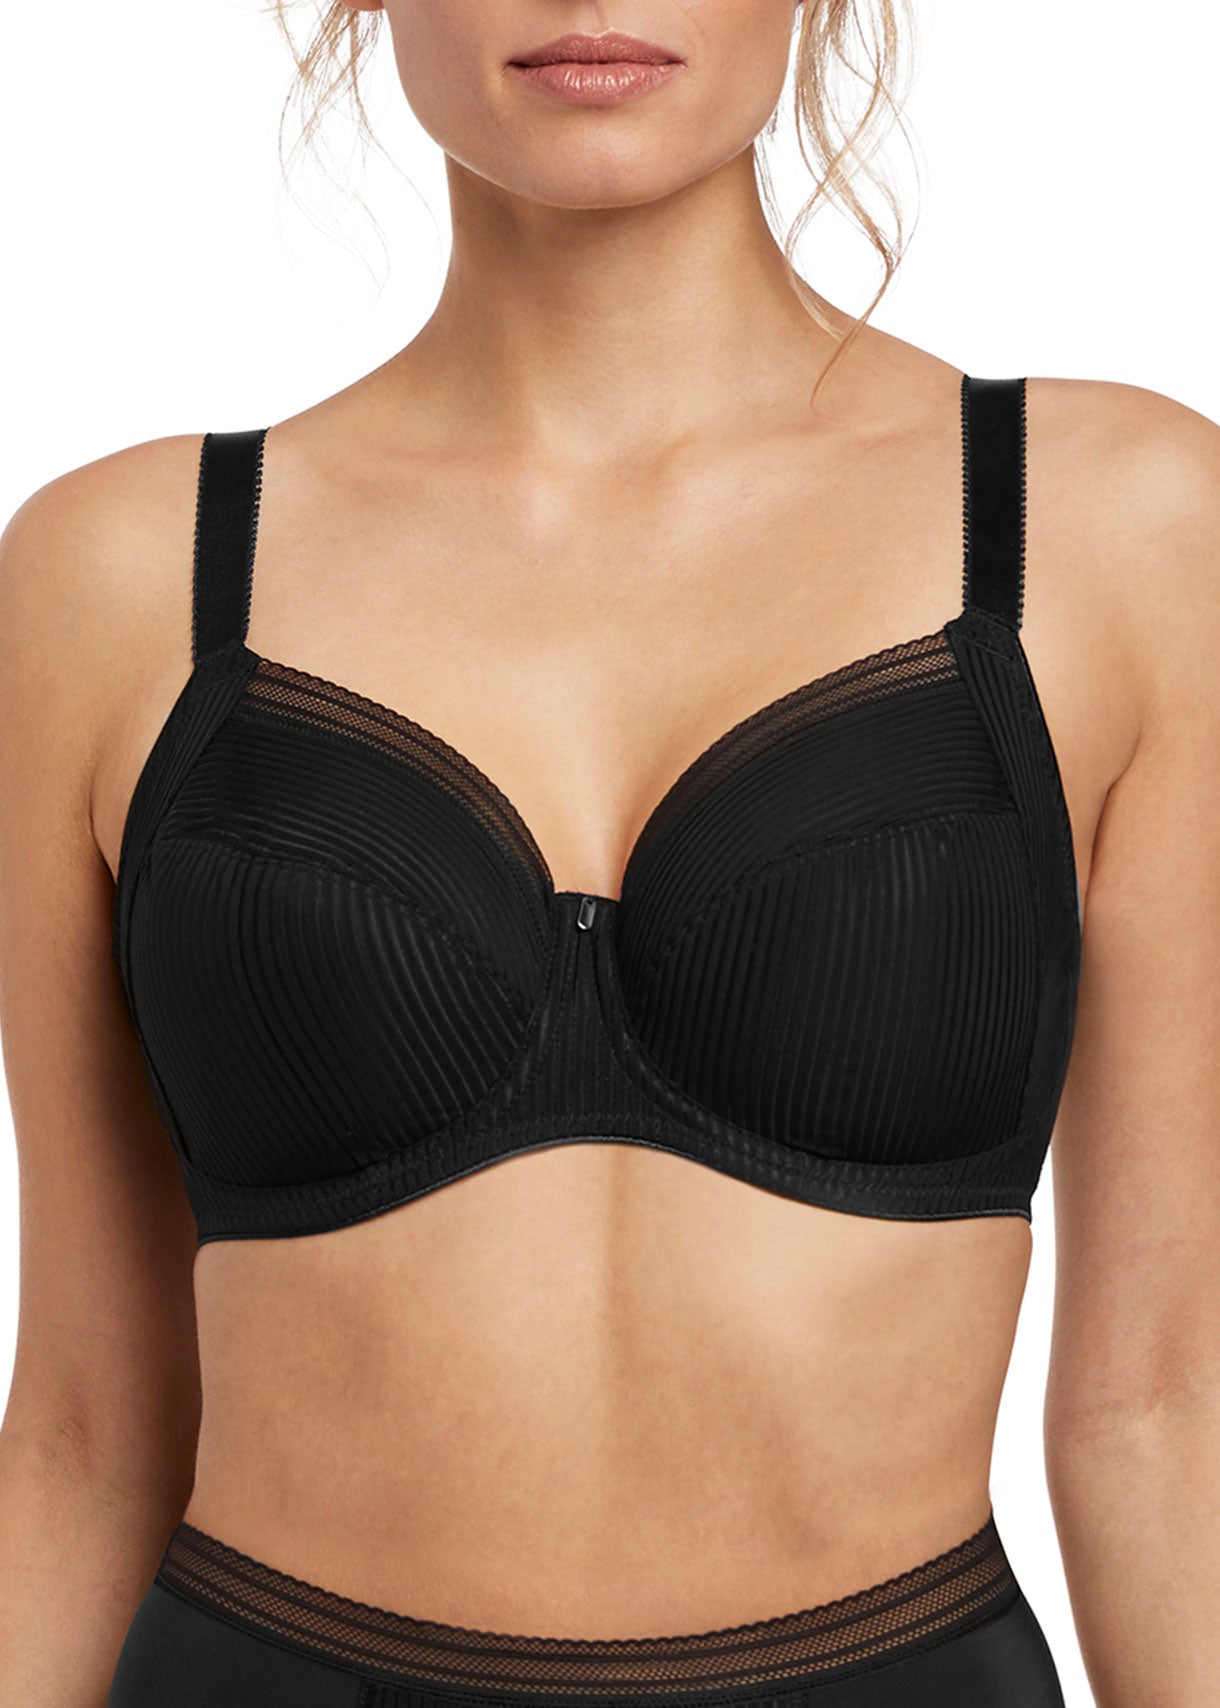 Fantasie – Fusion – Full Cup Side Support Bra